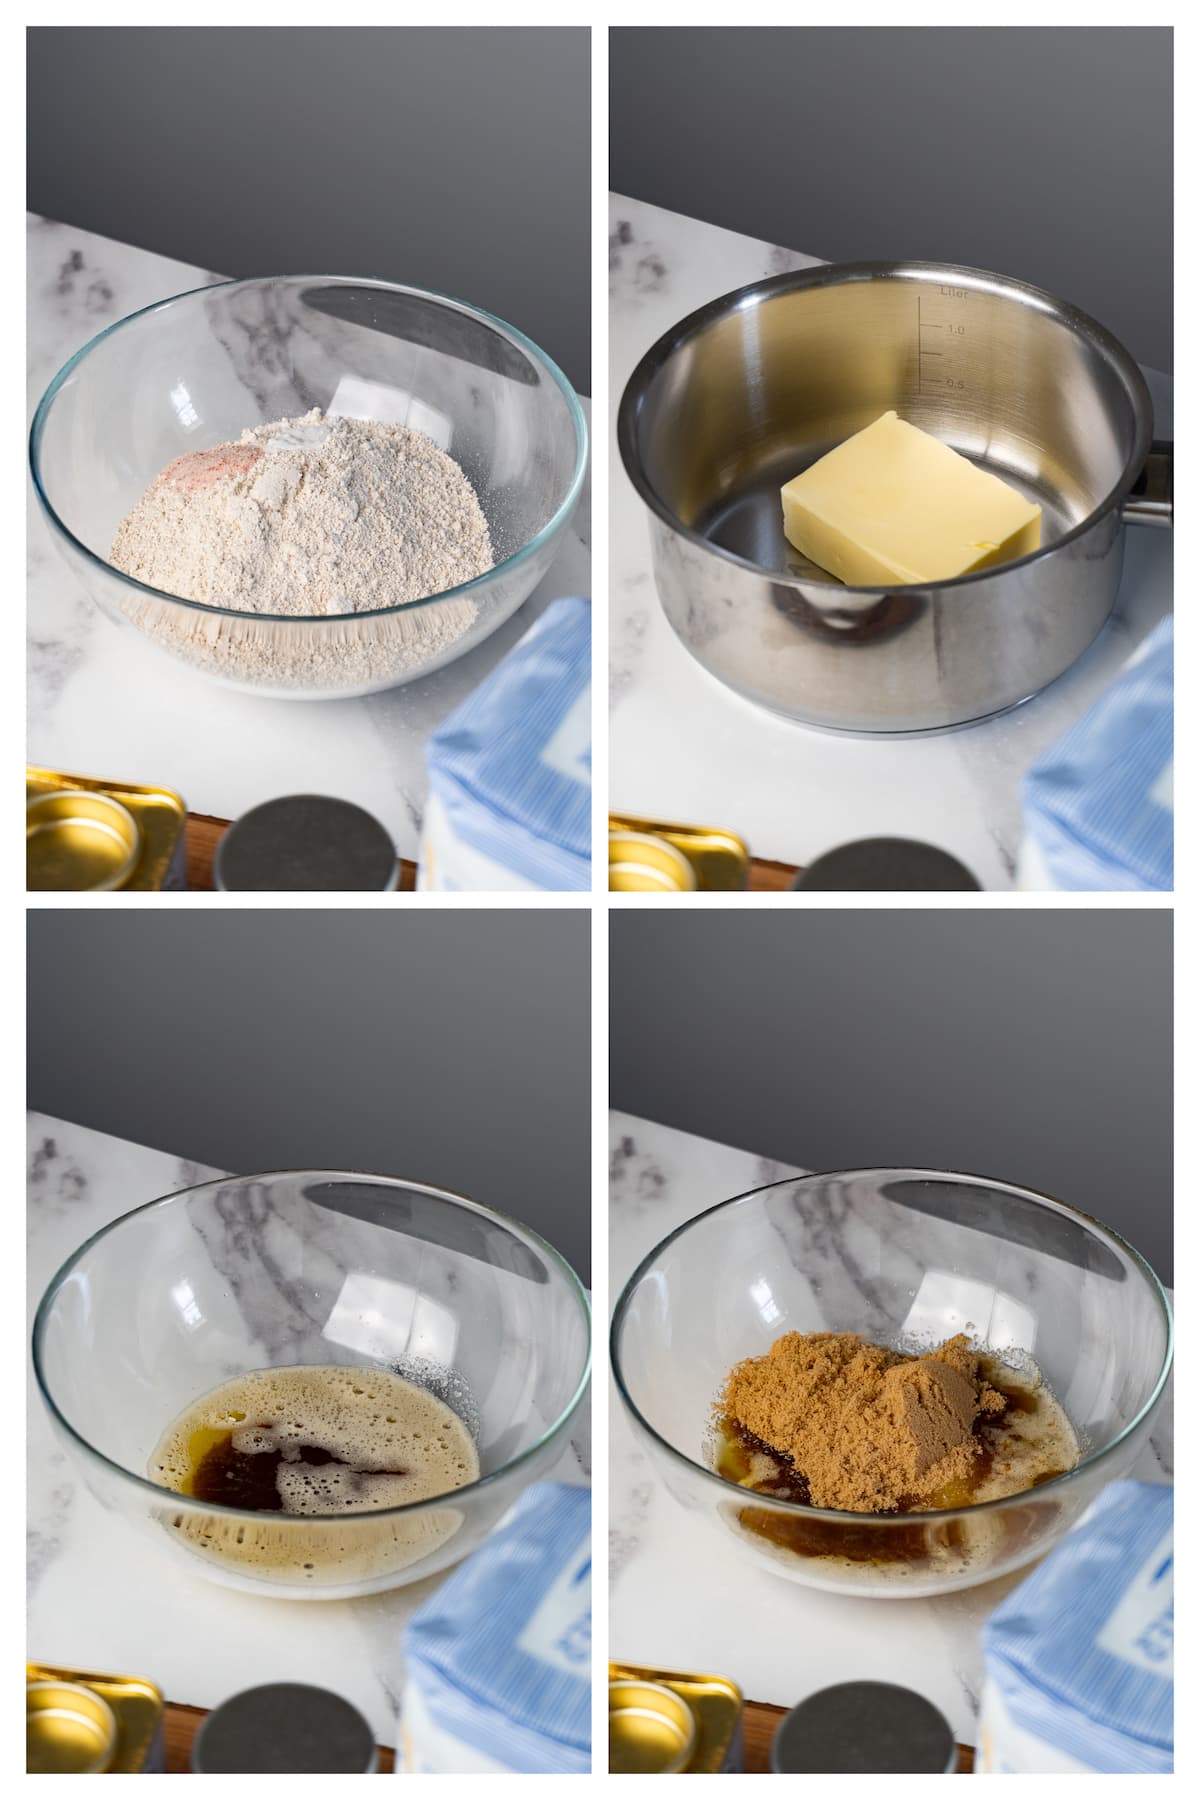 The collage image shows four steps to make cookie dough with oat flour and chocolate chips.